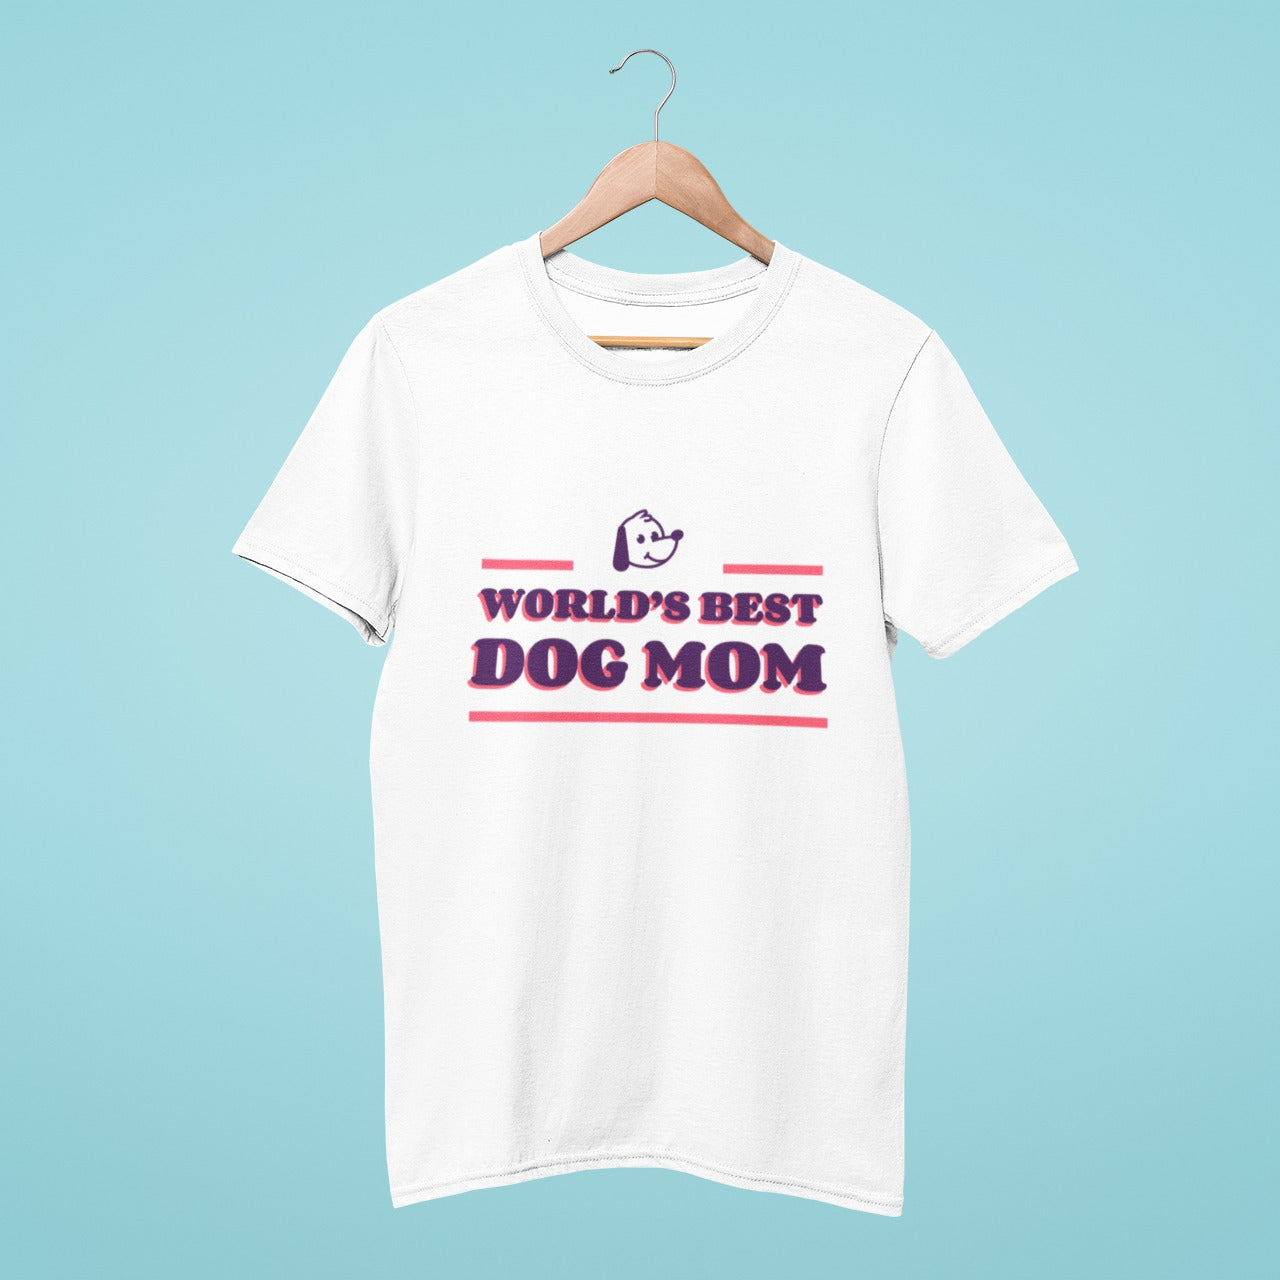 This white t-shirt proudly displays the title "World's Best Dog Mom" in bold lettering, making it the perfect gift for any proud dog mom. Made from high-quality material, this shirt is both comfortable and durable. Show your appreciation for your furry friend and celebrate your role as a dog mom with this stylish t-shirt.